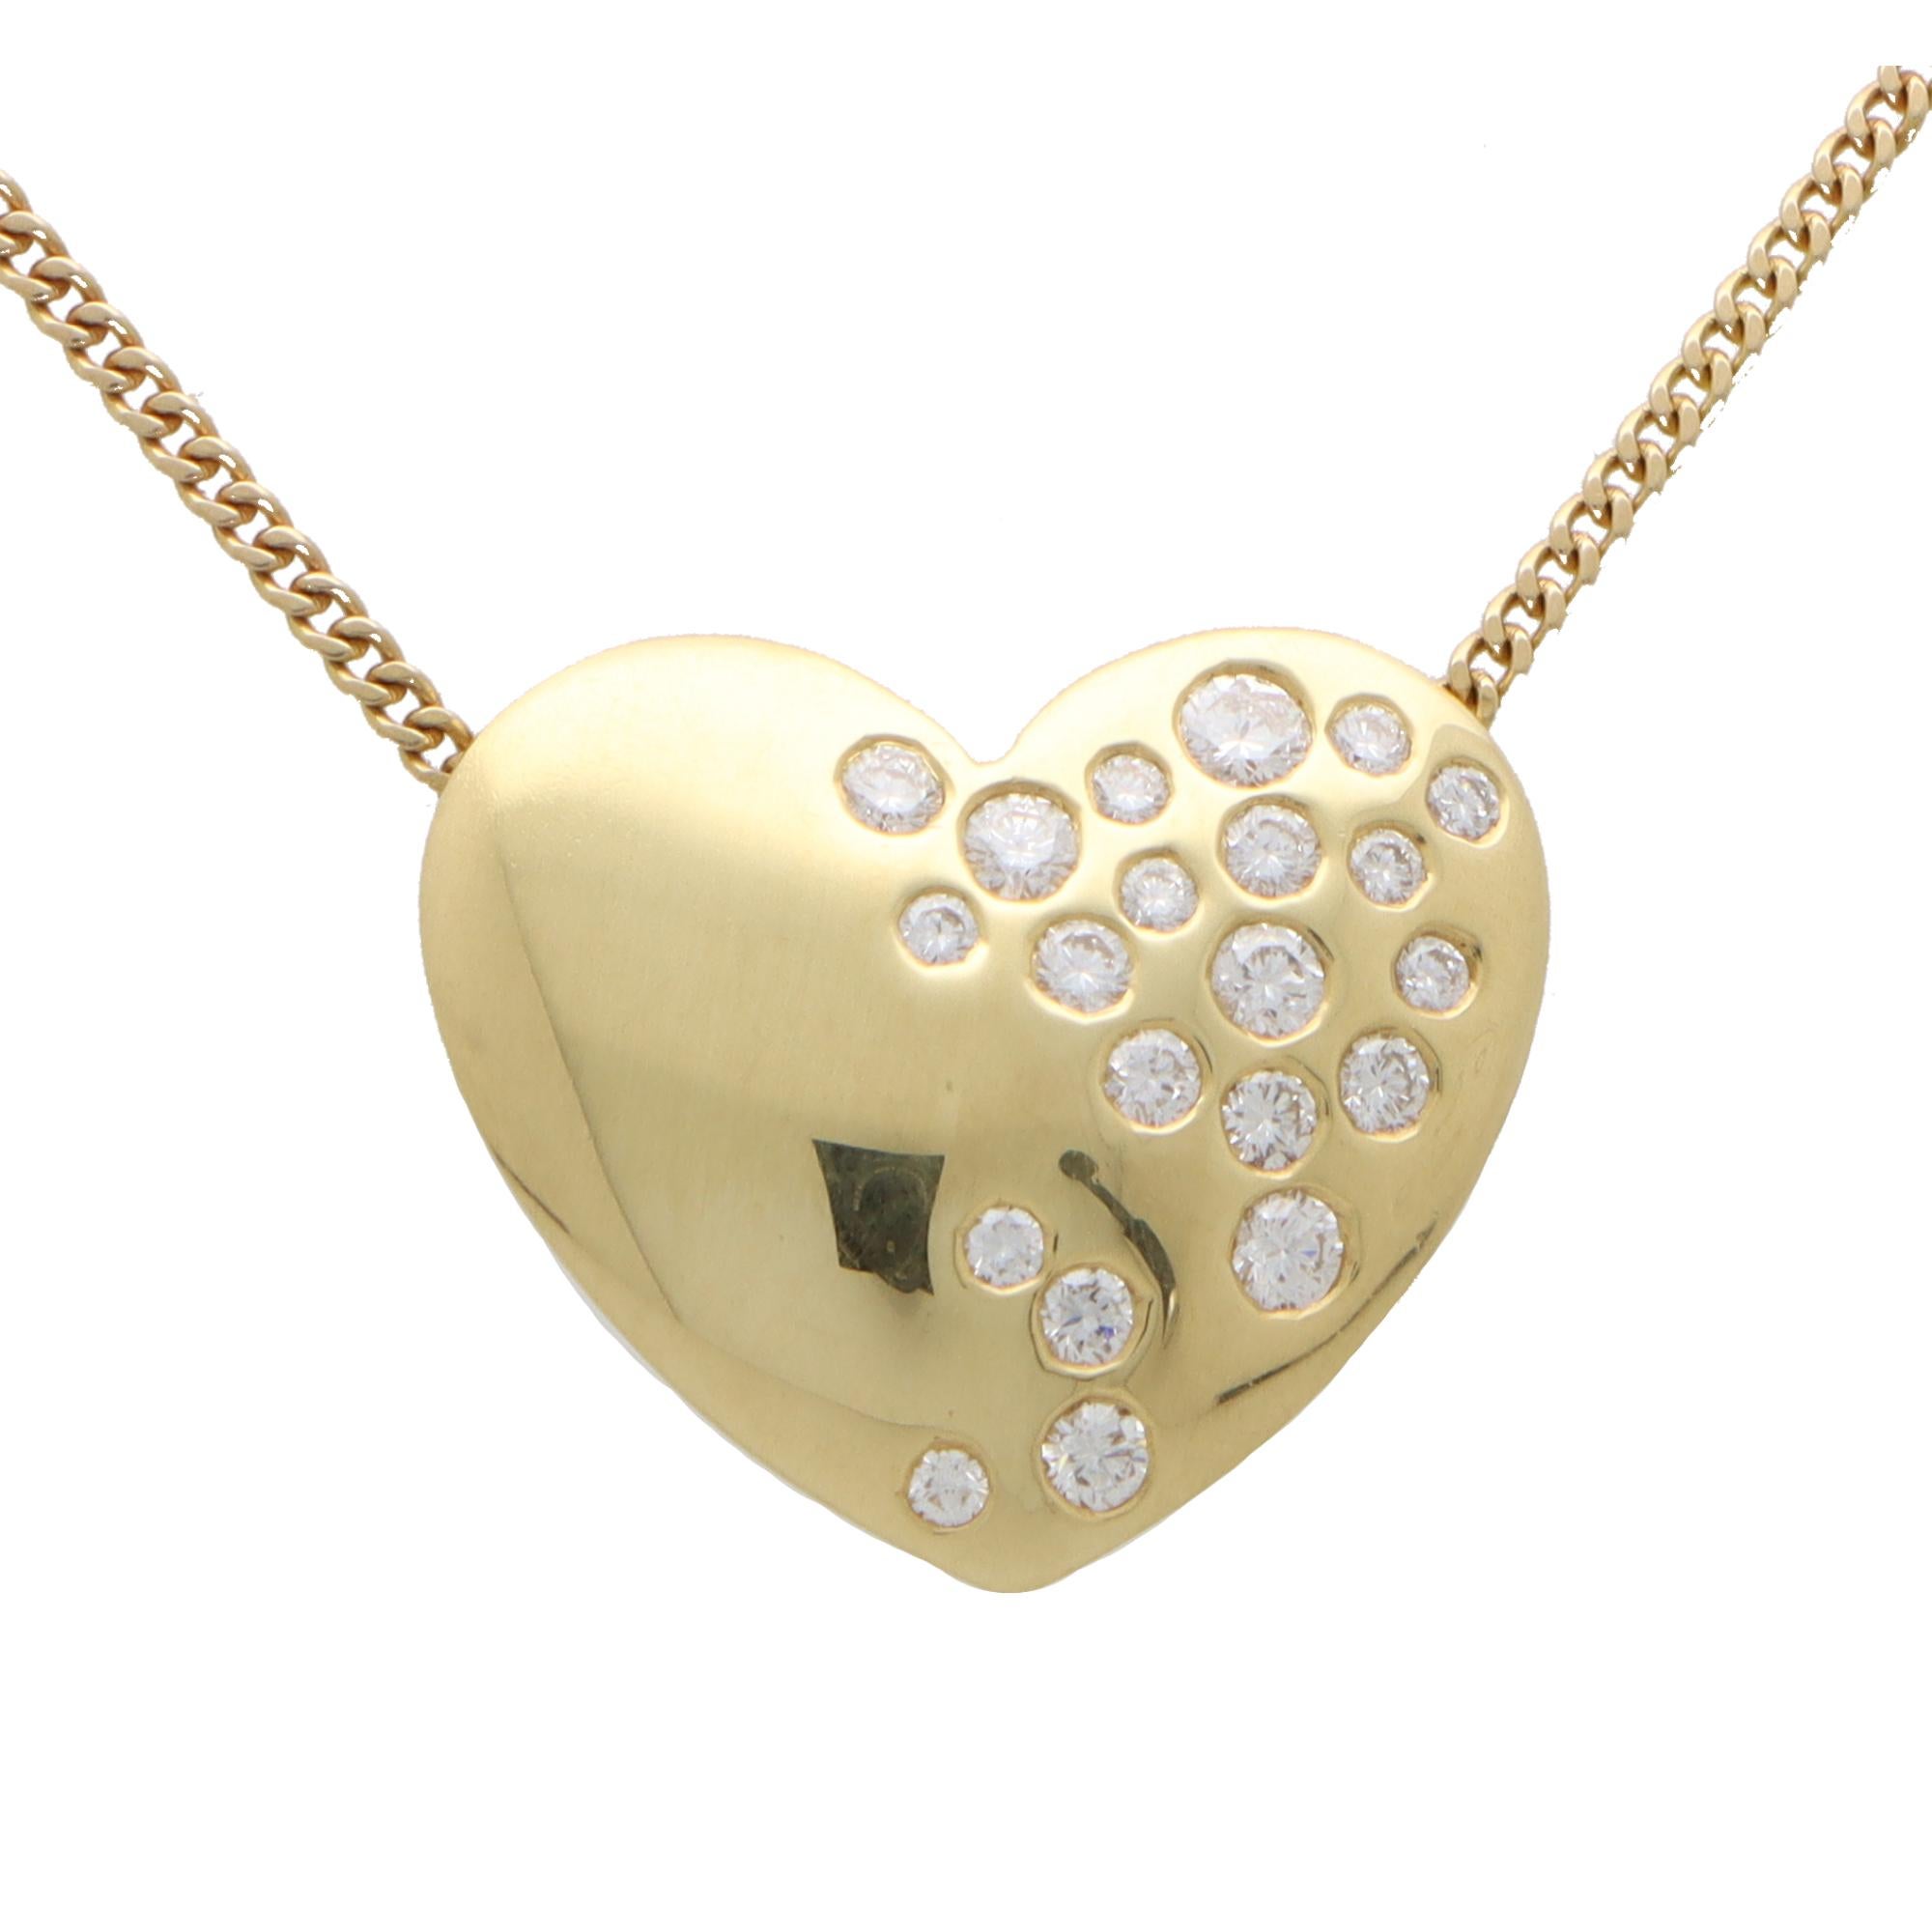 Round Cut Contemporary Diamond Heart Pendant Necklace Set in 18k Yellow Gold